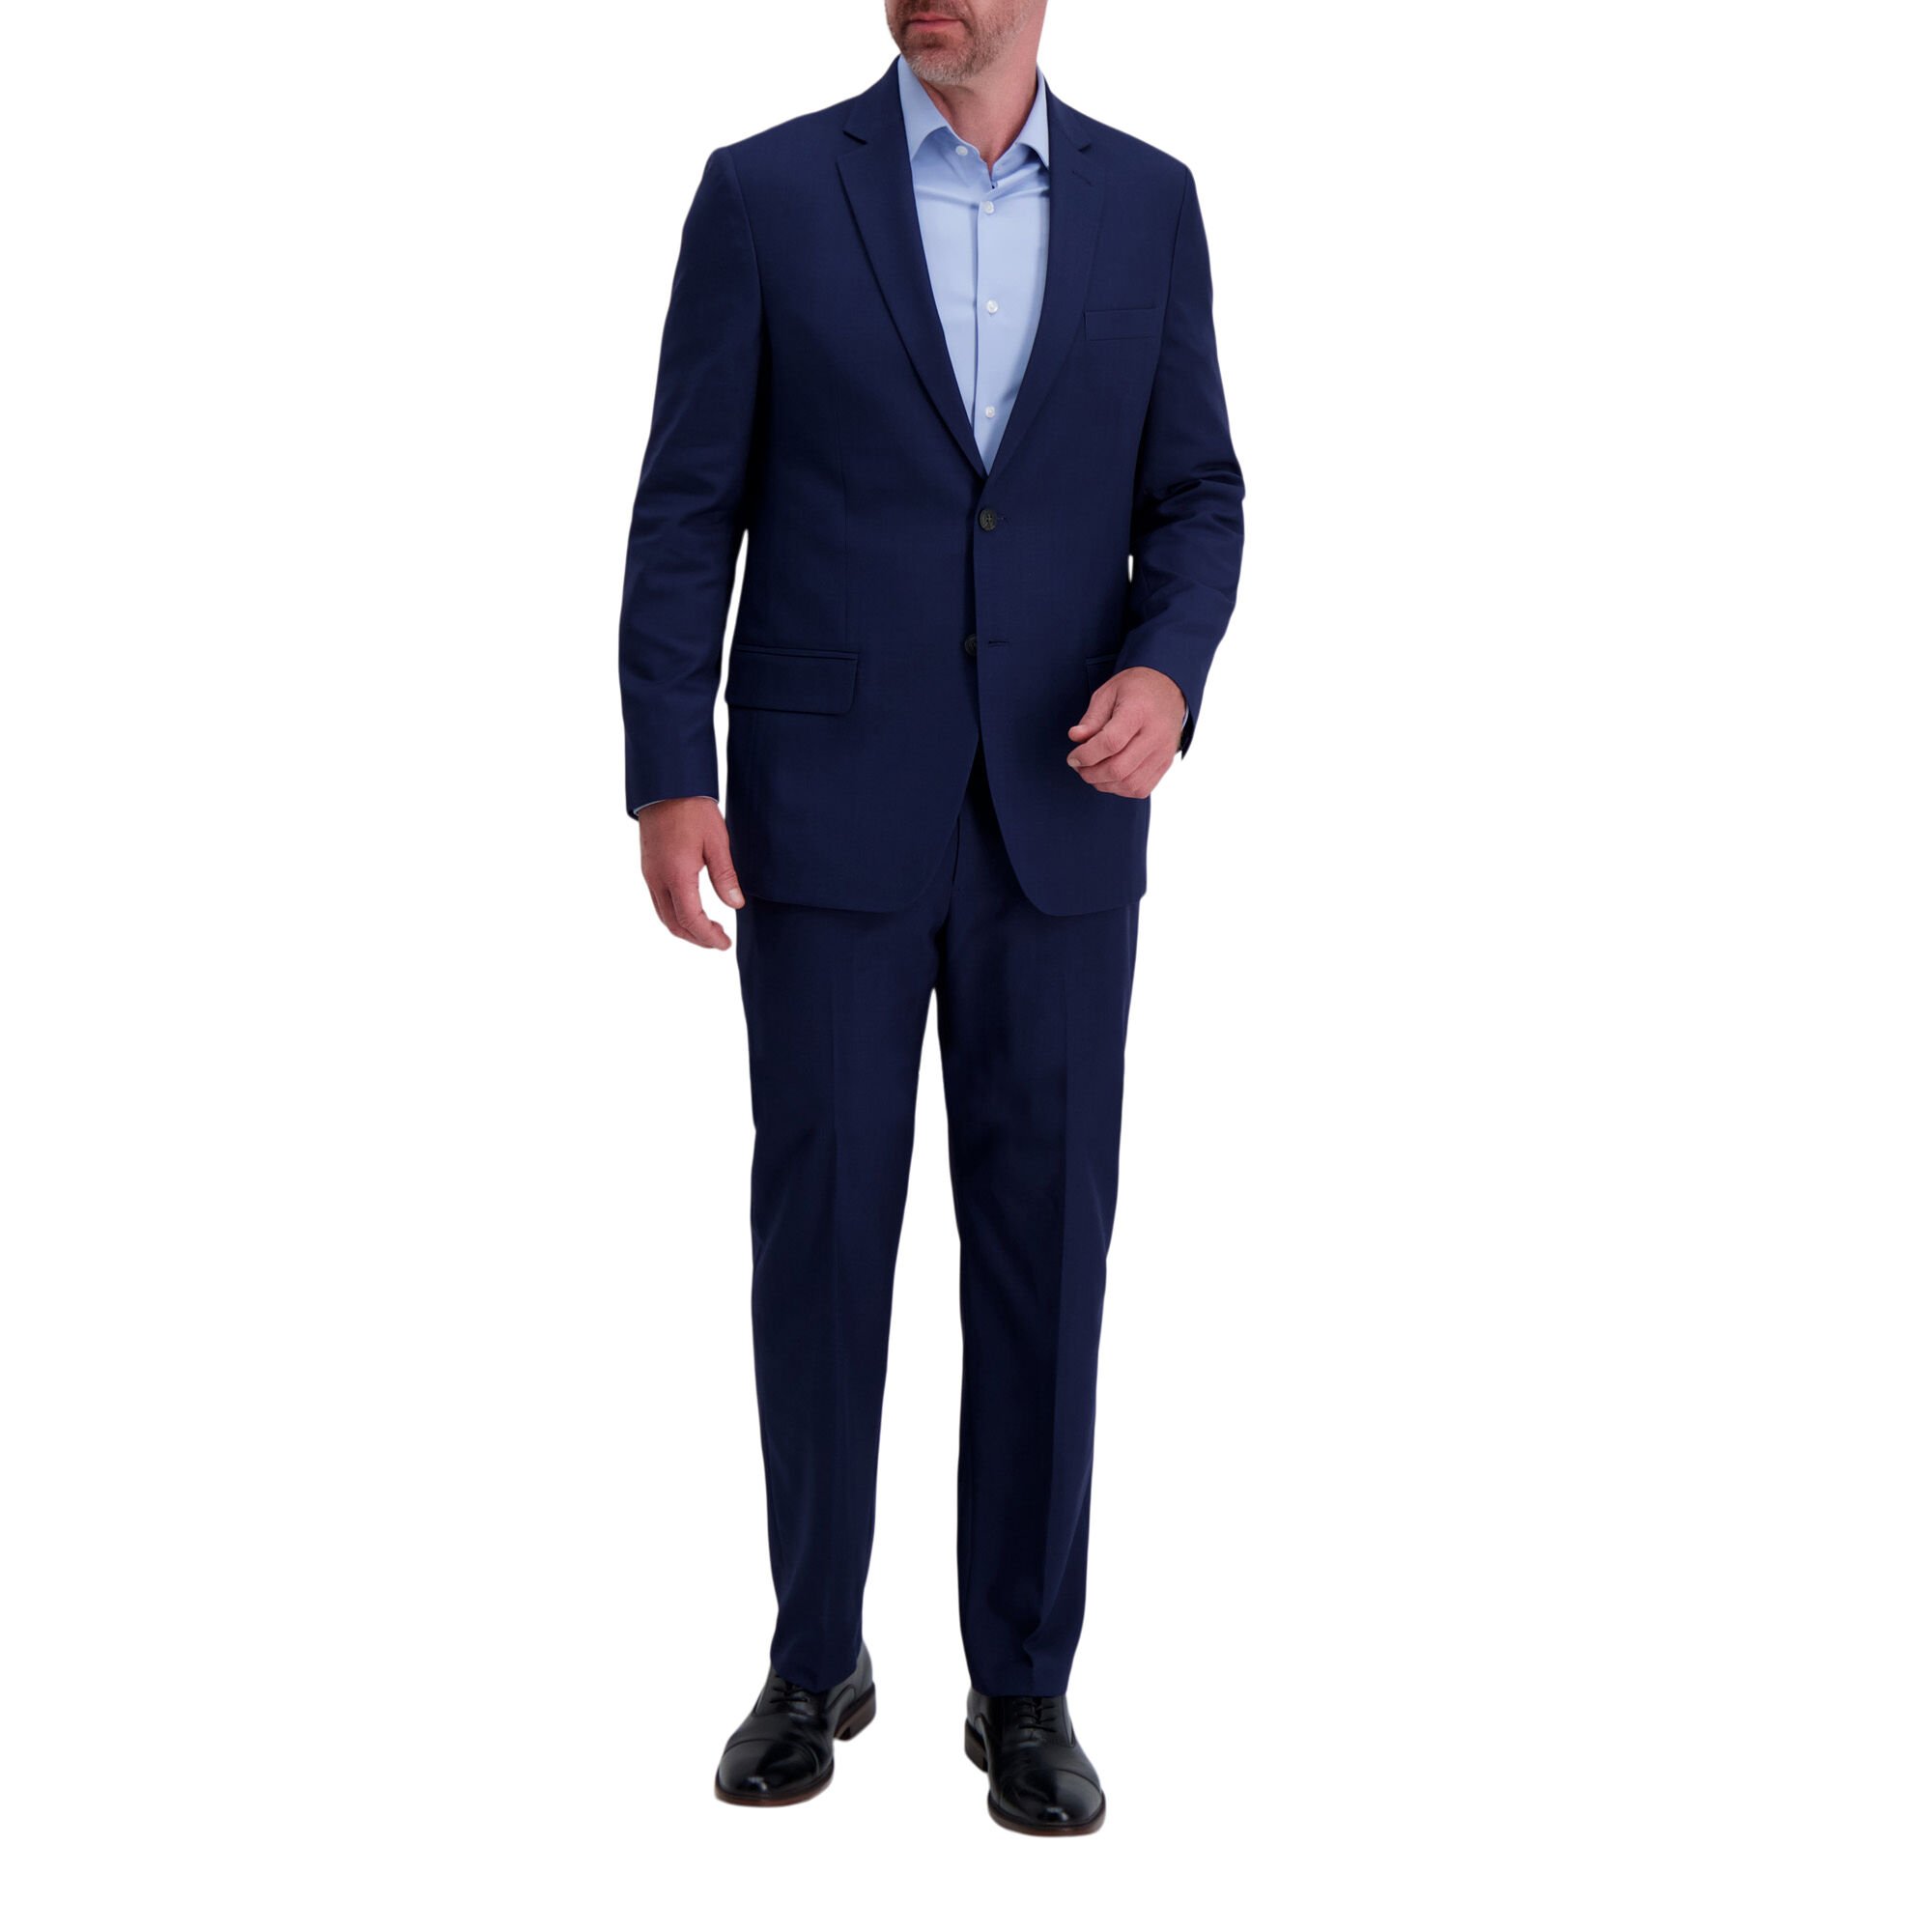 Haggar Smart Wash Repreve Suit Separate Jacket Midnight (HZ01000 Clothing Suits) photo